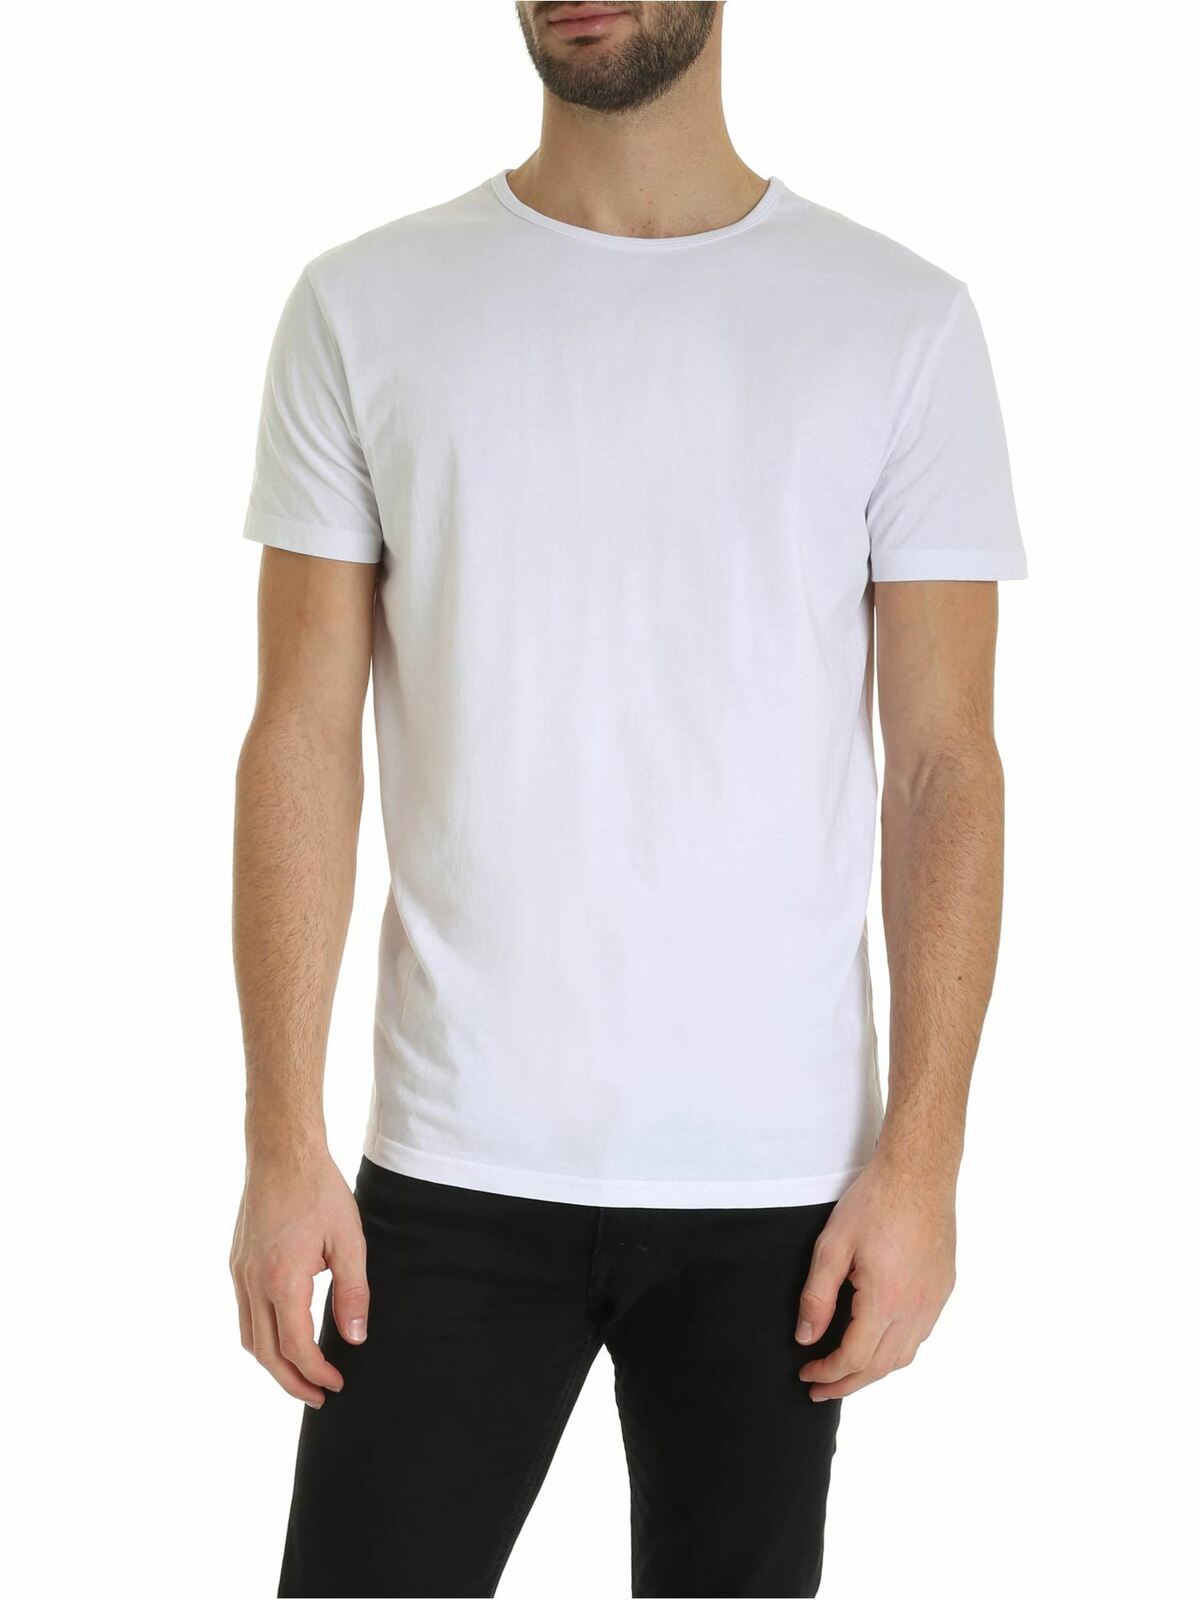 Paul Smith Set 2 Bicolor T-shirt In White